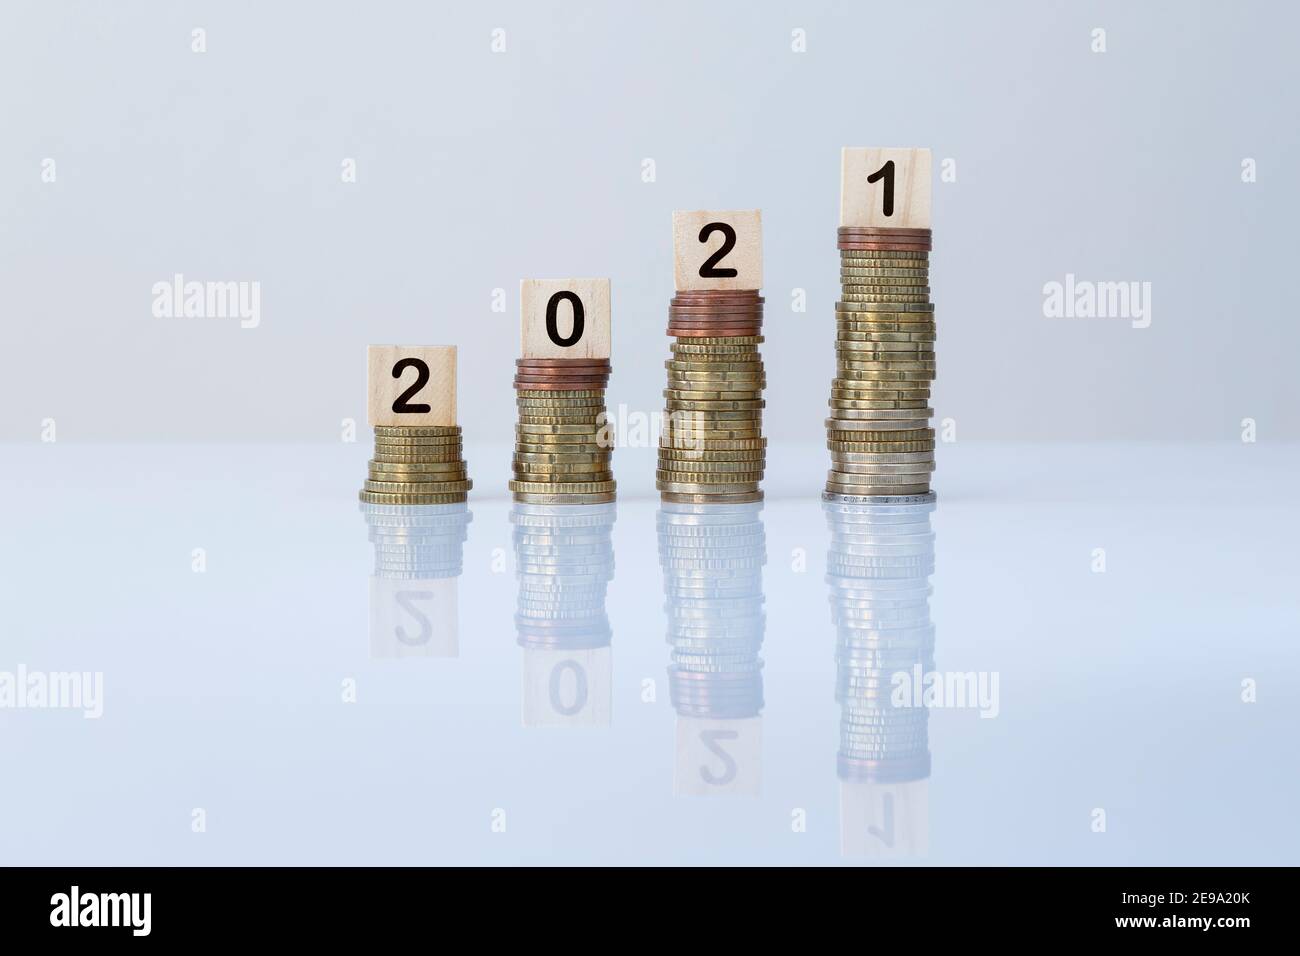 Number 2021 on wooden blocks on top of ascending stacks of coins on gray background. Concept of increase of wealth, economy, financial growth&success. Stock Photo